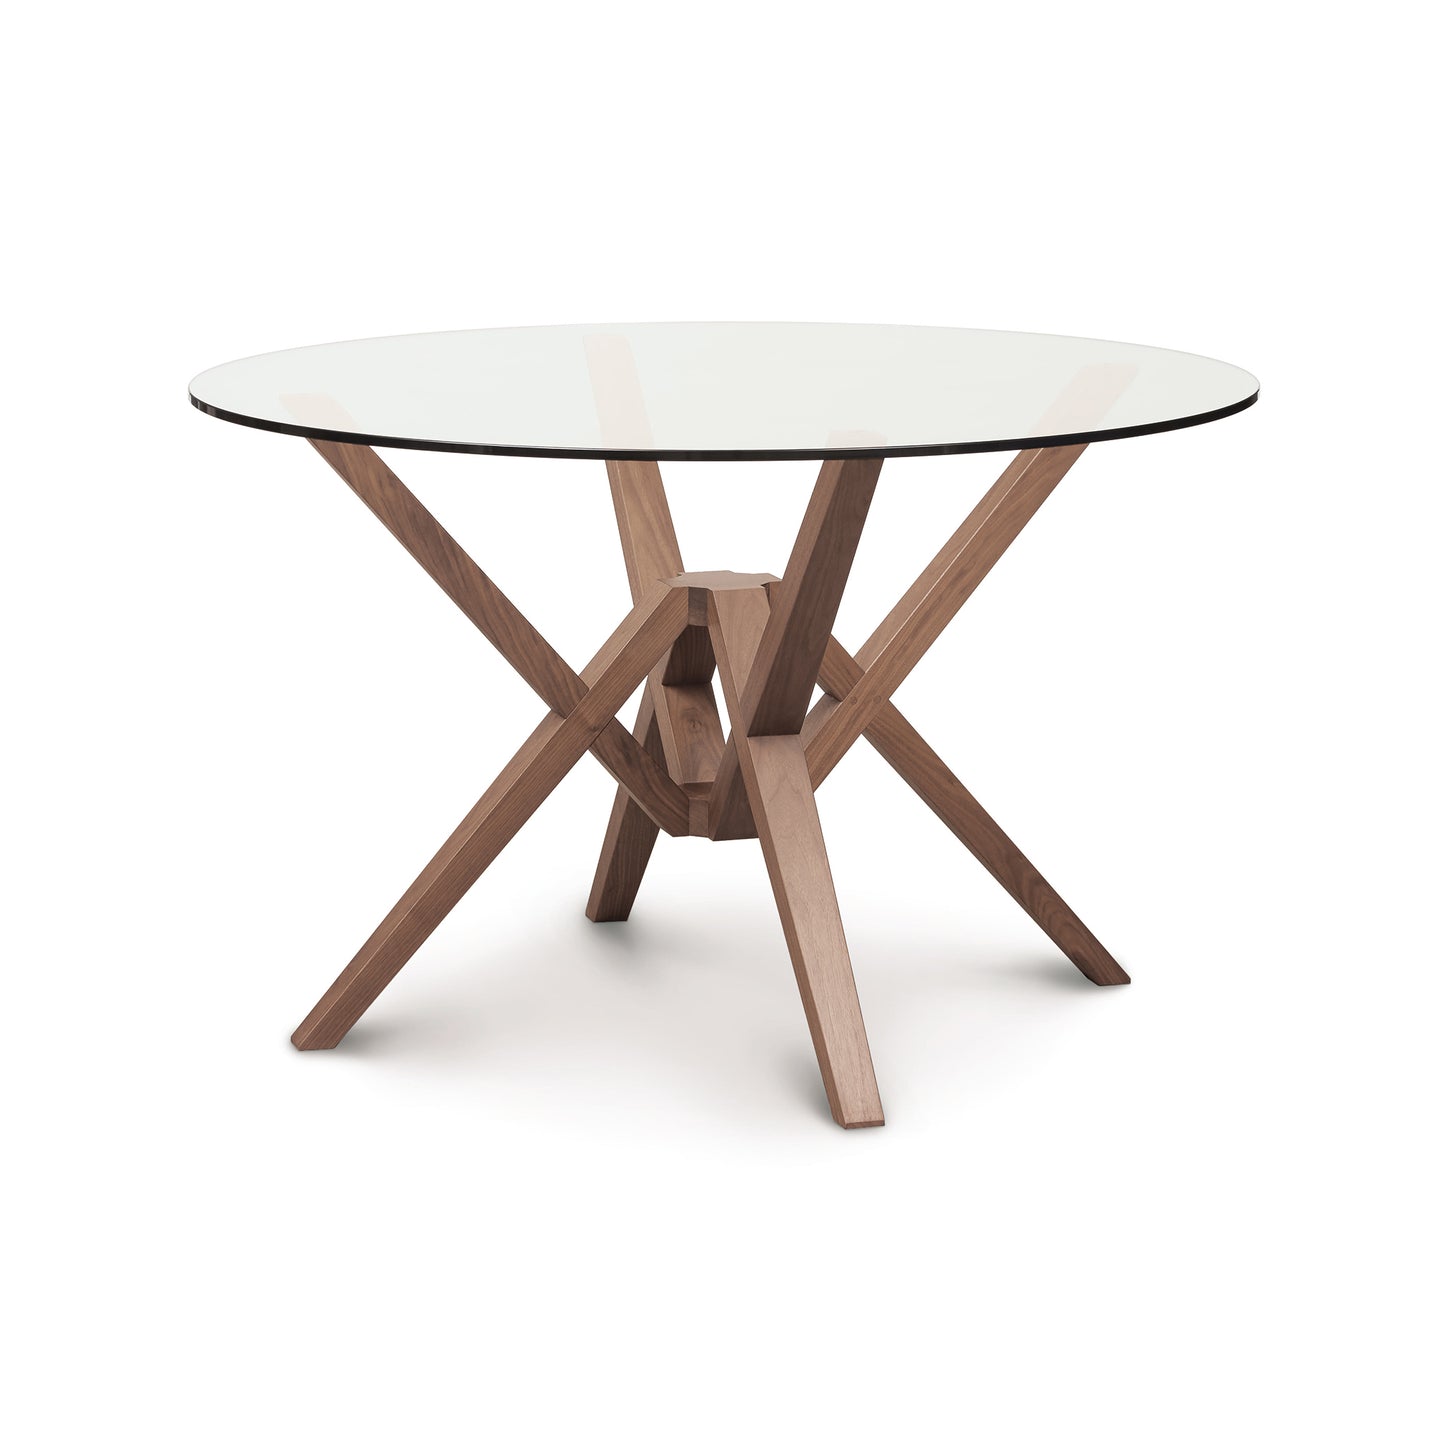 Copeland Furniture Exeter Round Glass Top Table - A modern dining table with a glass top and wooden legs, featuring innovative engineering and isometric design.